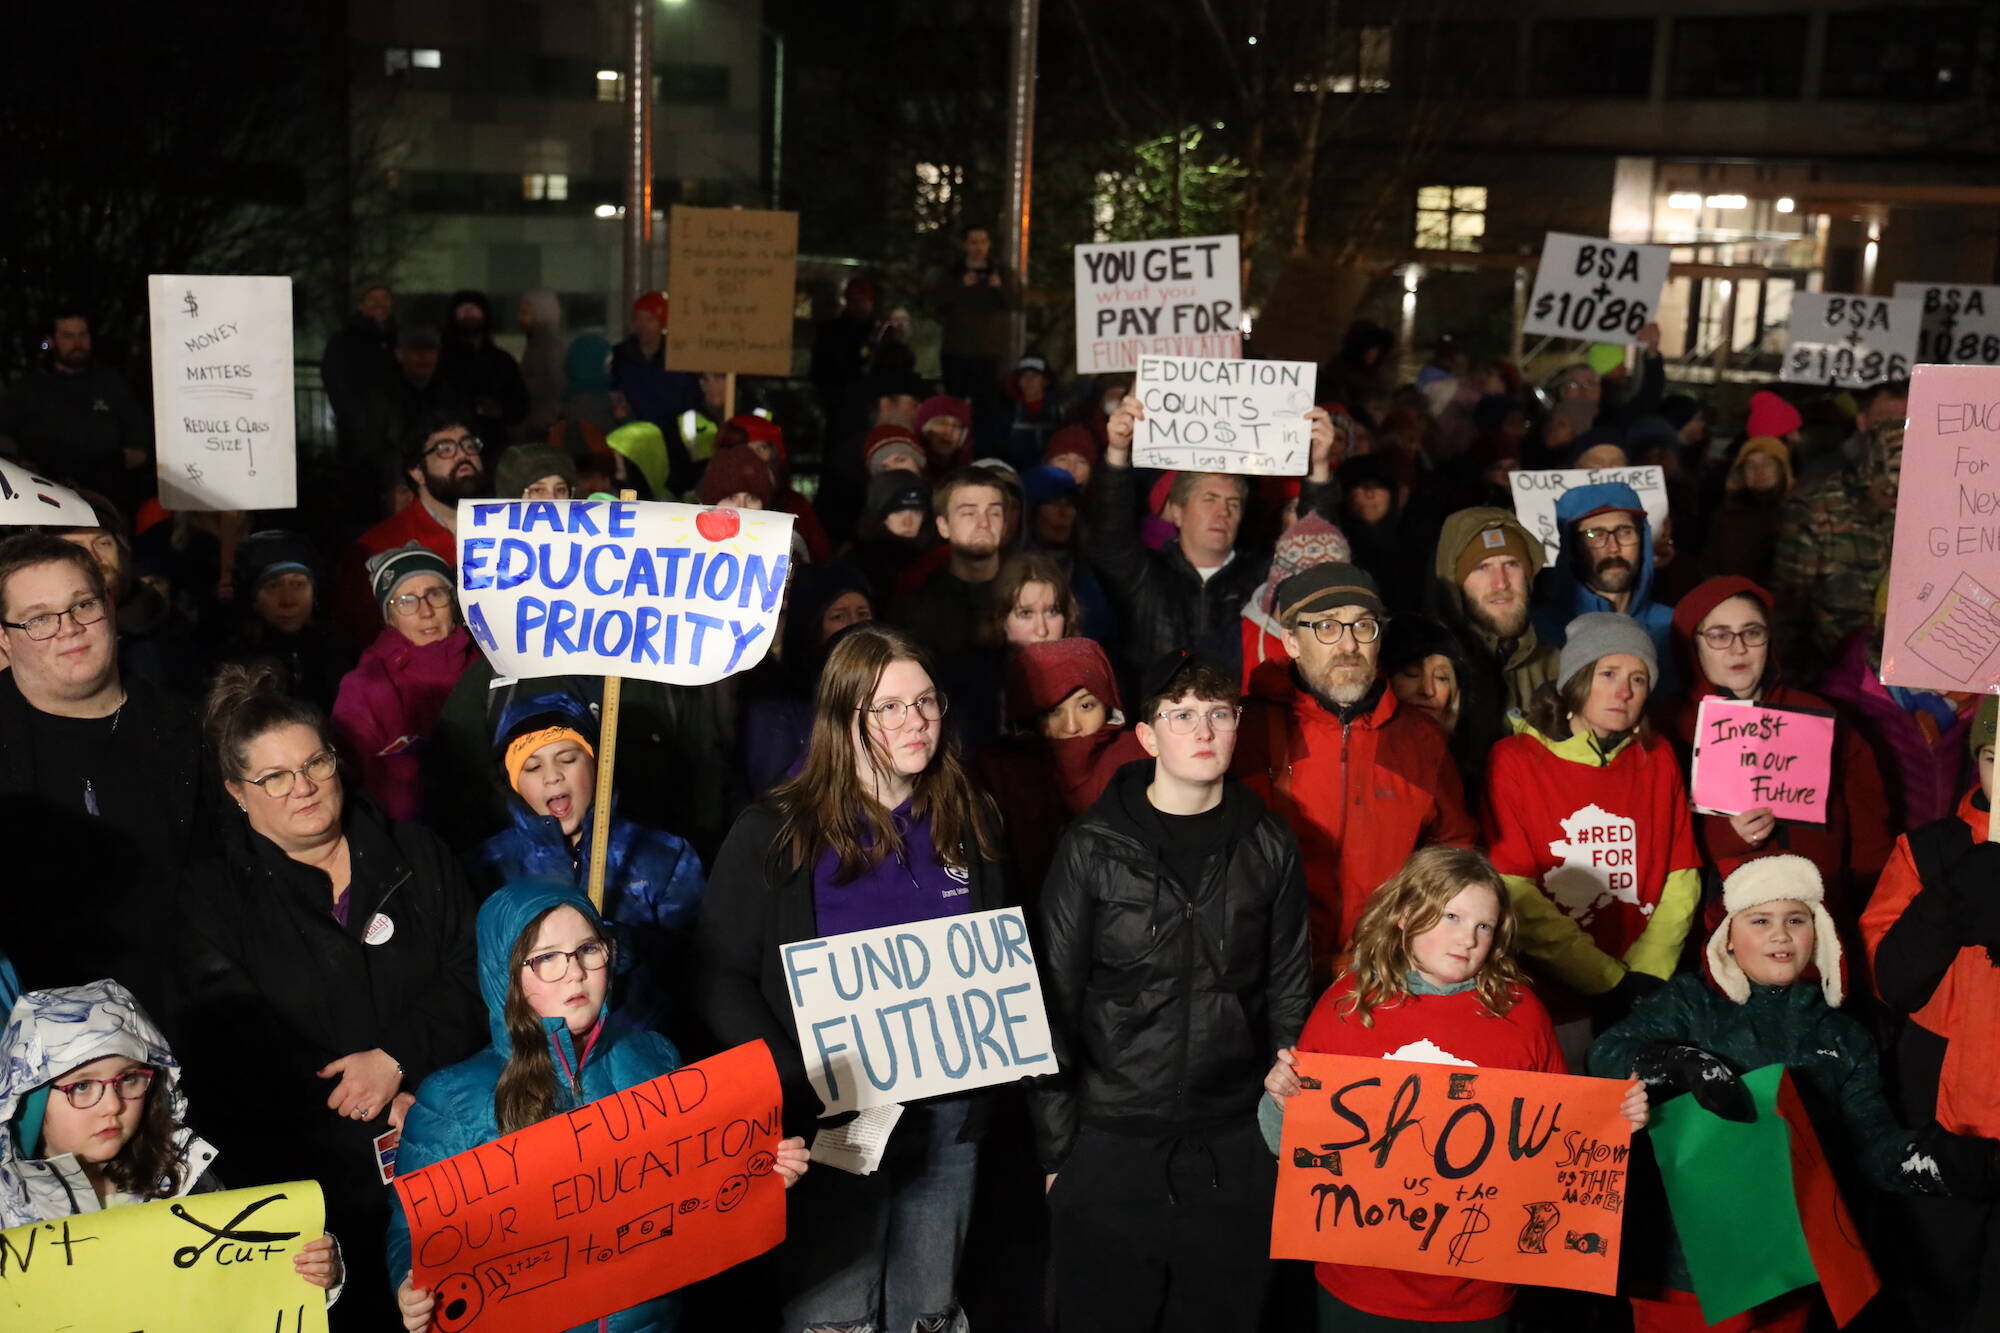 Dozens of Juneau teachers, students and residents gather at the steps of the Alaska State Capitol Monday evening in advocacy for an increase in the state’s flat funding via the base student allocation. (Clarise Larson / Juneau Empire)